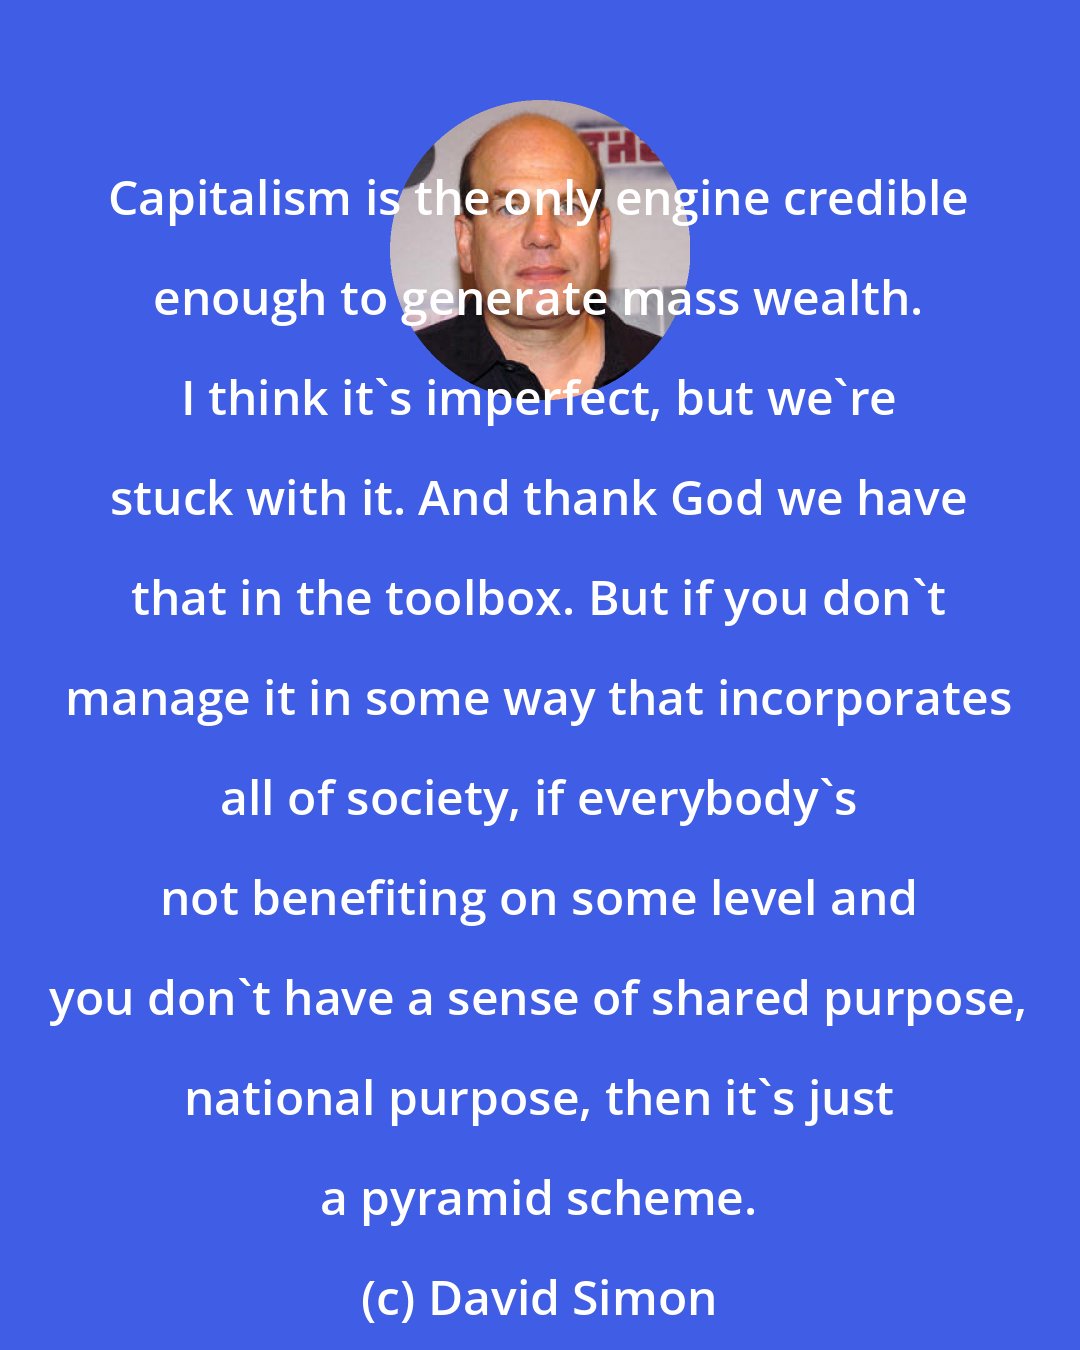 David Simon: Capitalism is the only engine credible enough to generate mass wealth. I think it's imperfect, but we're stuck with it. And thank God we have that in the toolbox. But if you don't manage it in some way that incorporates all of society, if everybody's not benefiting on some level and you don't have a sense of shared purpose, national purpose, then it's just a pyramid scheme.